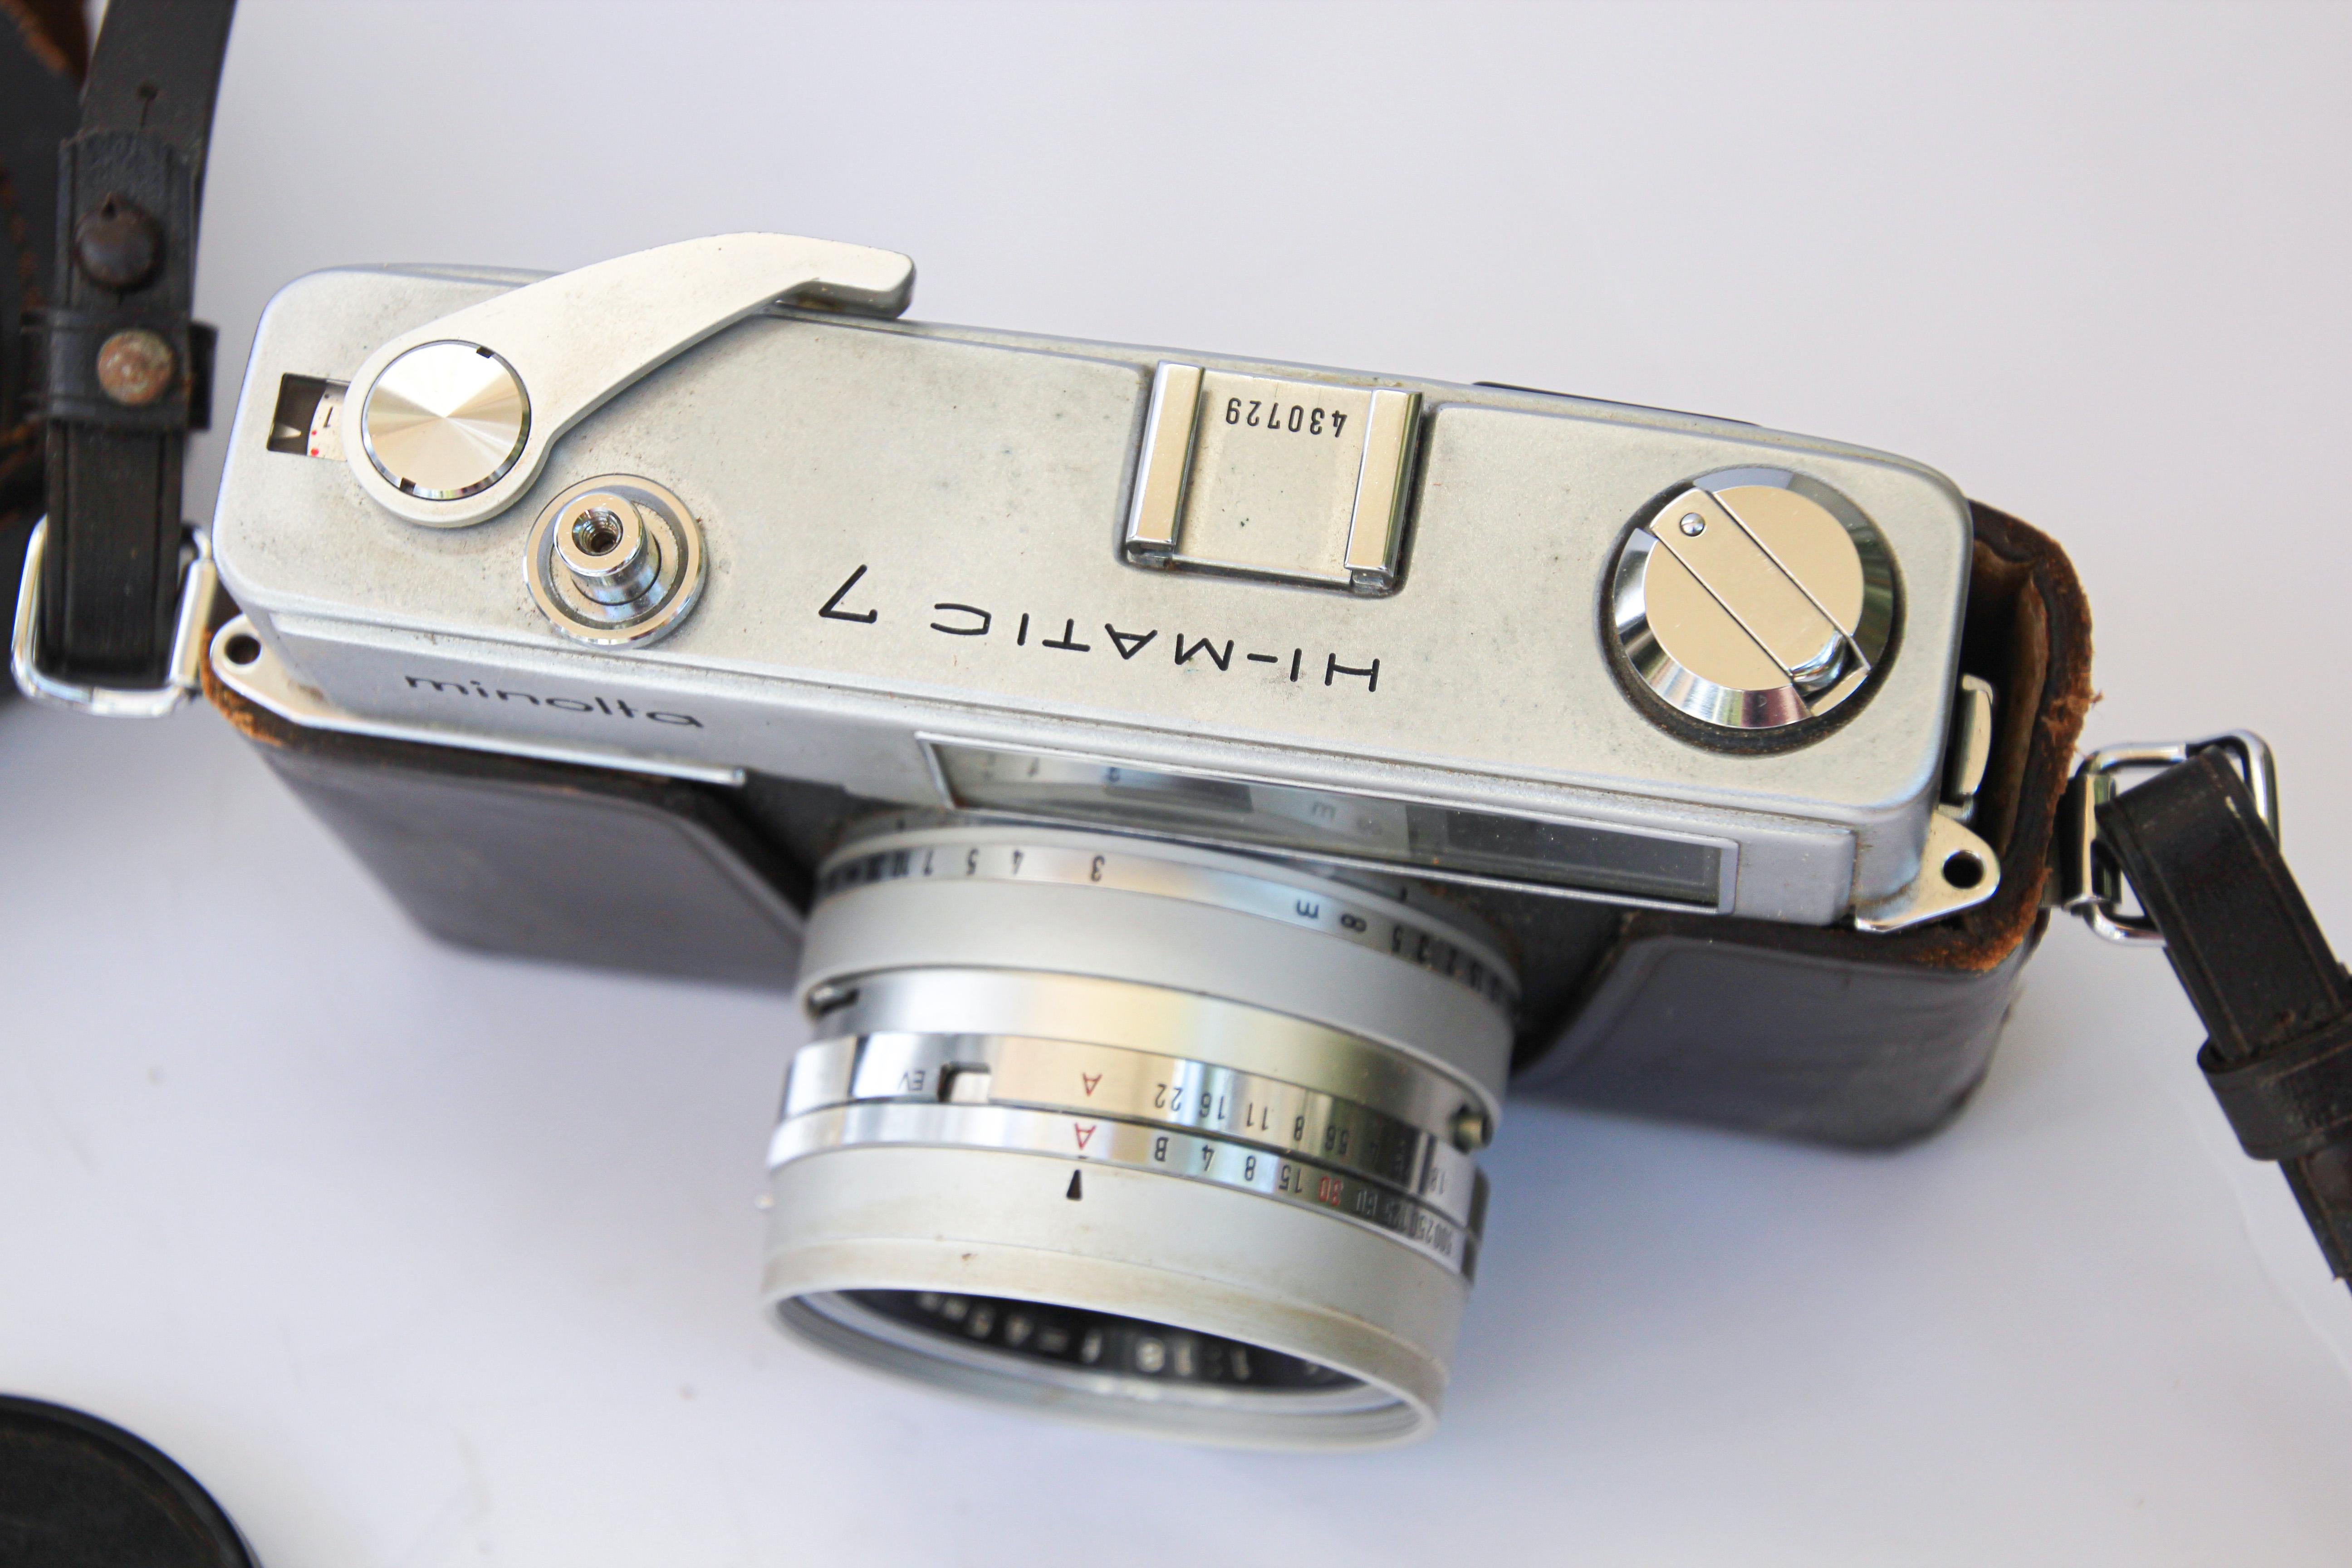 Collectible vintage 1960s Minolta HI-MATIC 7 35mm film camera in hard leather case.
A technologically advanced vintage film camera.
With original leather case and strap and the original machined lens cap,
Made in Japan.
Great for a collector or